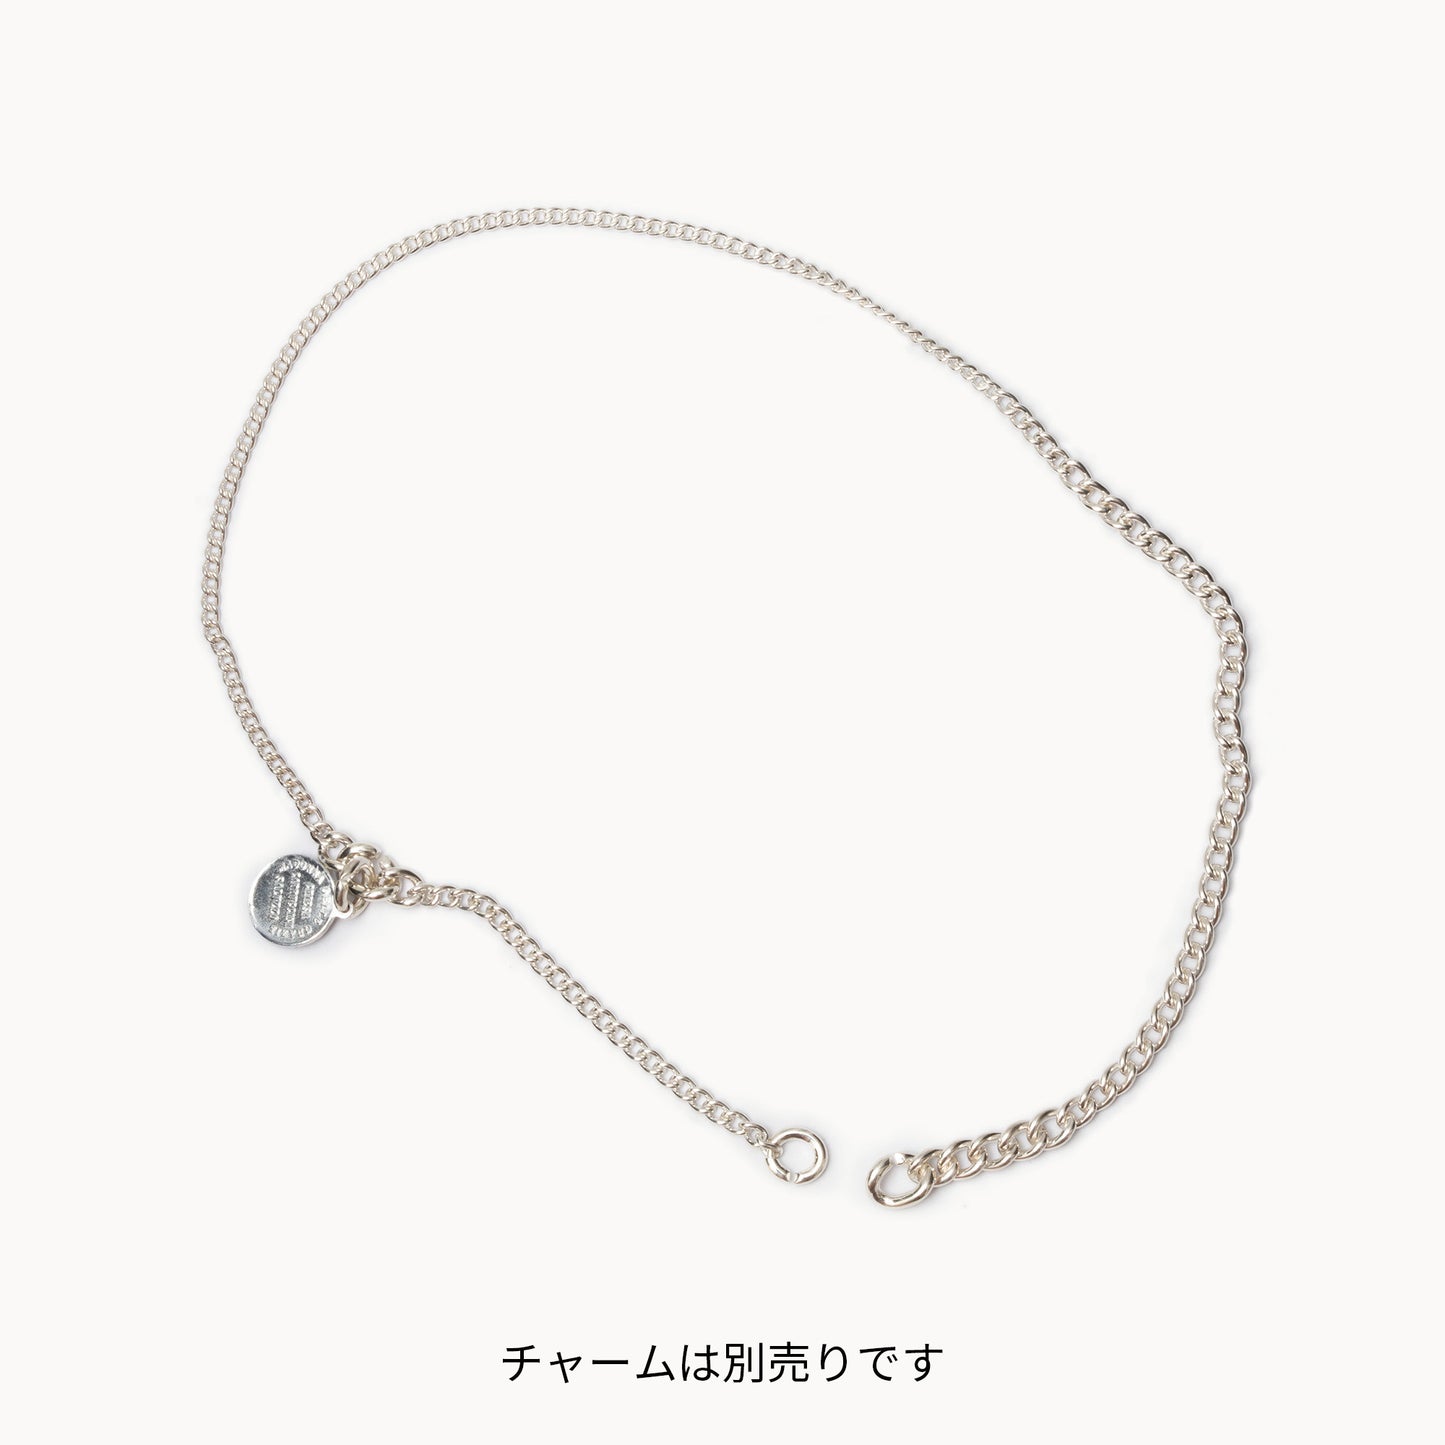 Necklace / Mask Chain ネックレス / マスクチェーン